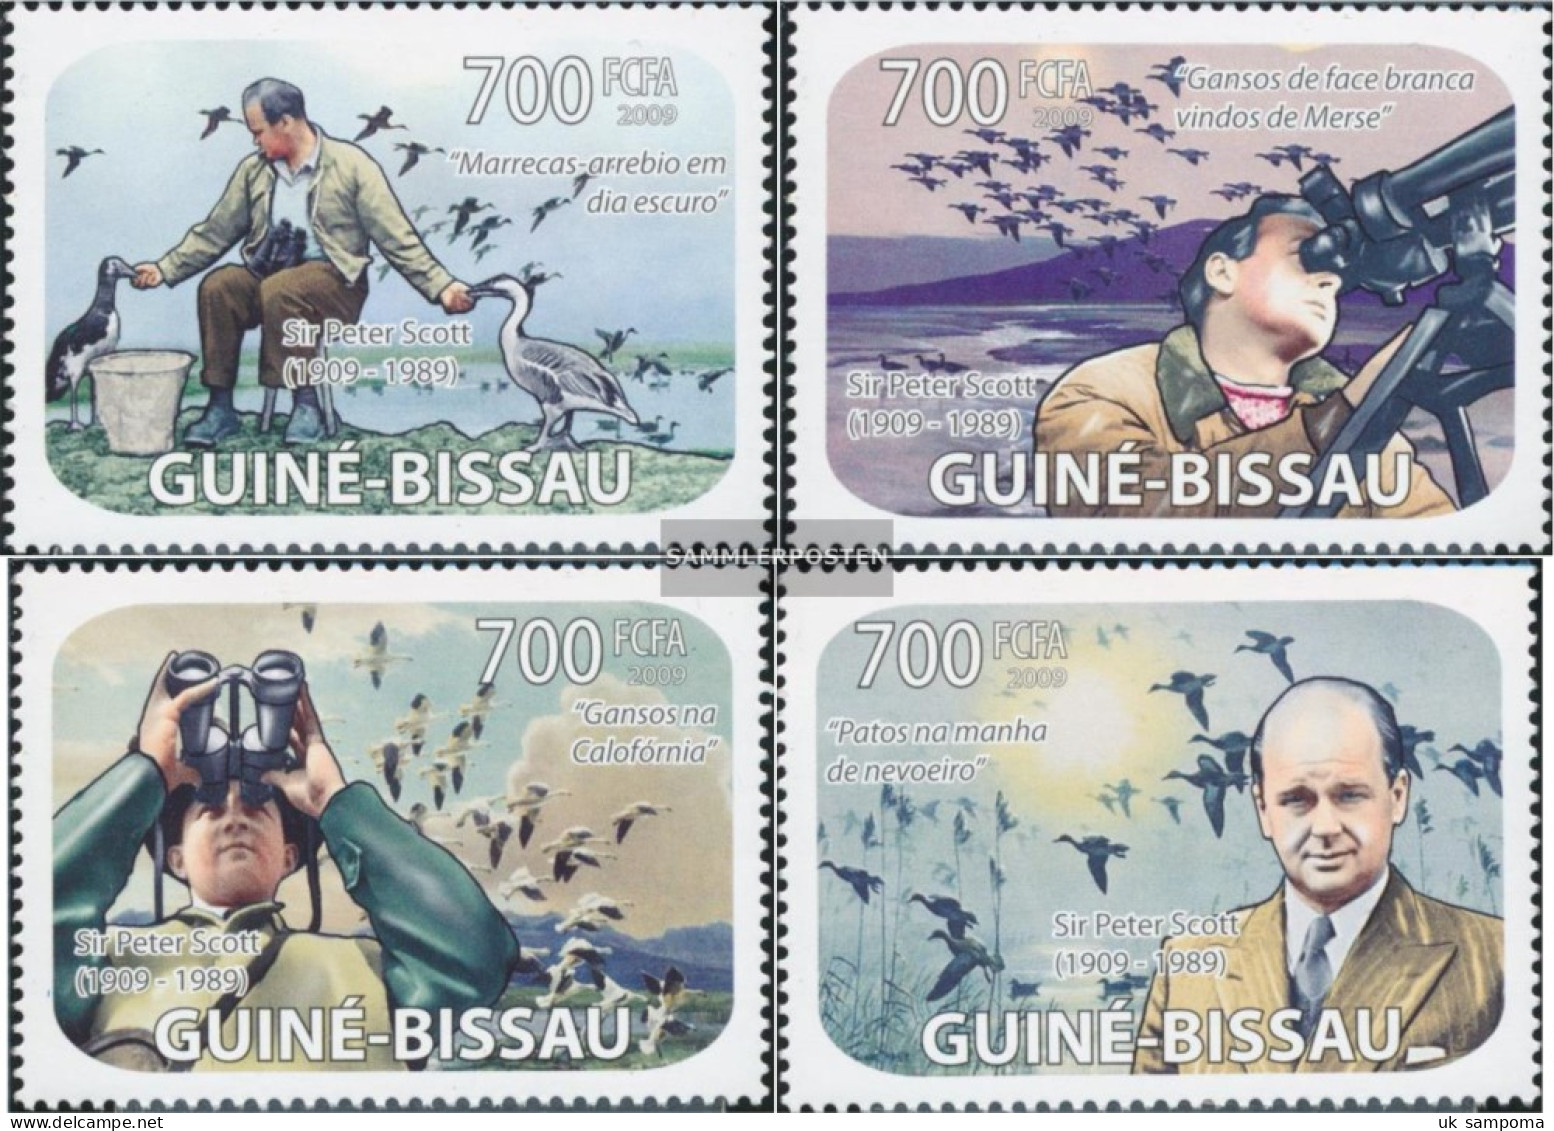 Guinea-Bissau 4153-4156 (complete. Issue) Unmounted Mint / Never Hinged 2009 Peter Scott - Guinea-Bissau